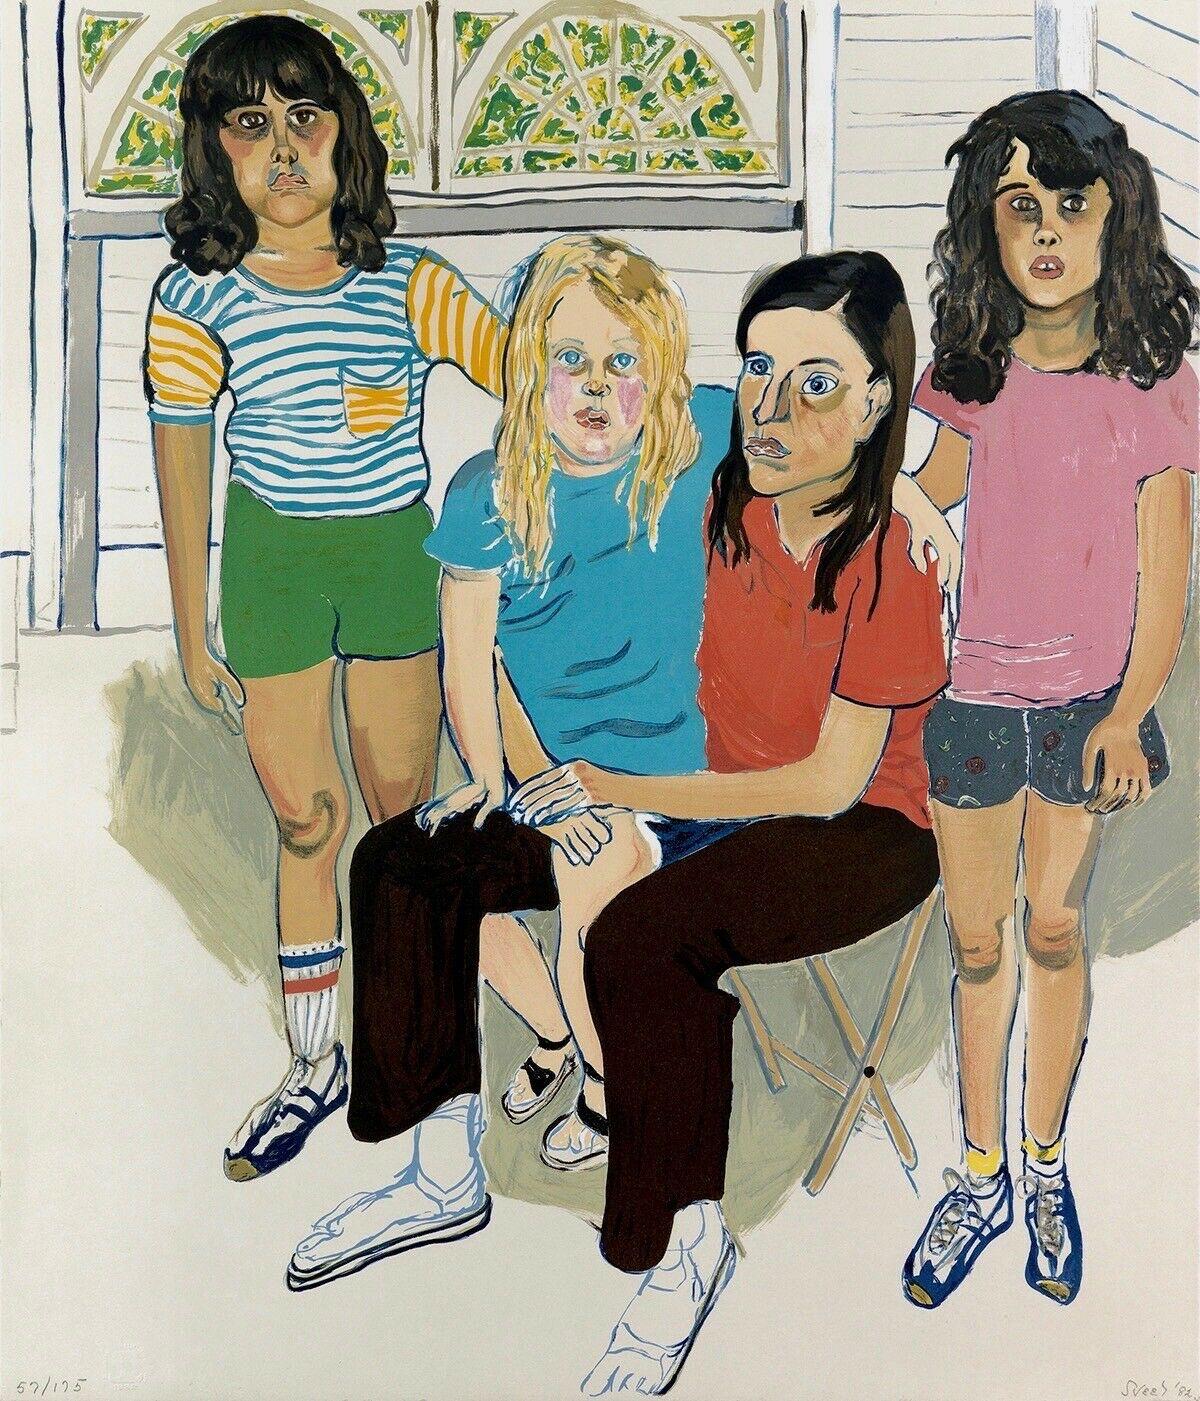 Artist: Alice Neel (1900-1984)
Title: The Family
Year: 1982
Medium: Lithograph on Arches paper
Edition: 57/175, plus proofs
Size: 31.25 x 27 inches
Condition: Excellent
Inscription: Signed and numbered by the artist.
Notes:  Published by Eleanor